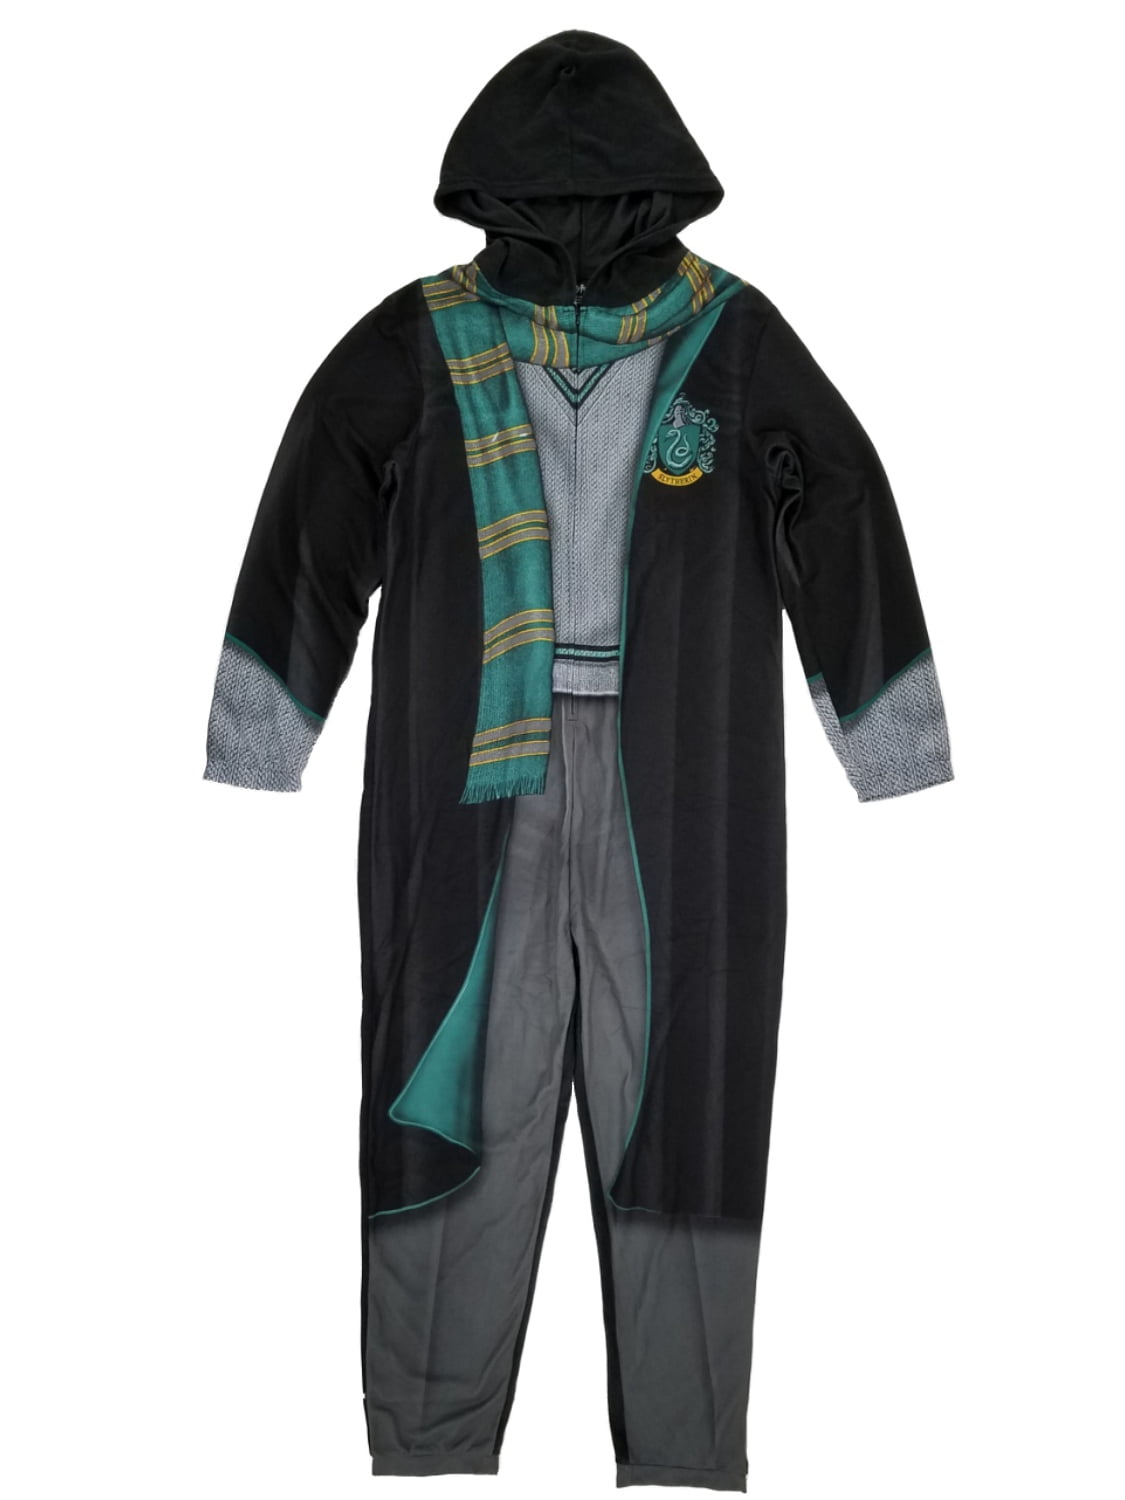 Harry Potter Slytherin Union Suit Costume Pajama with Hood 